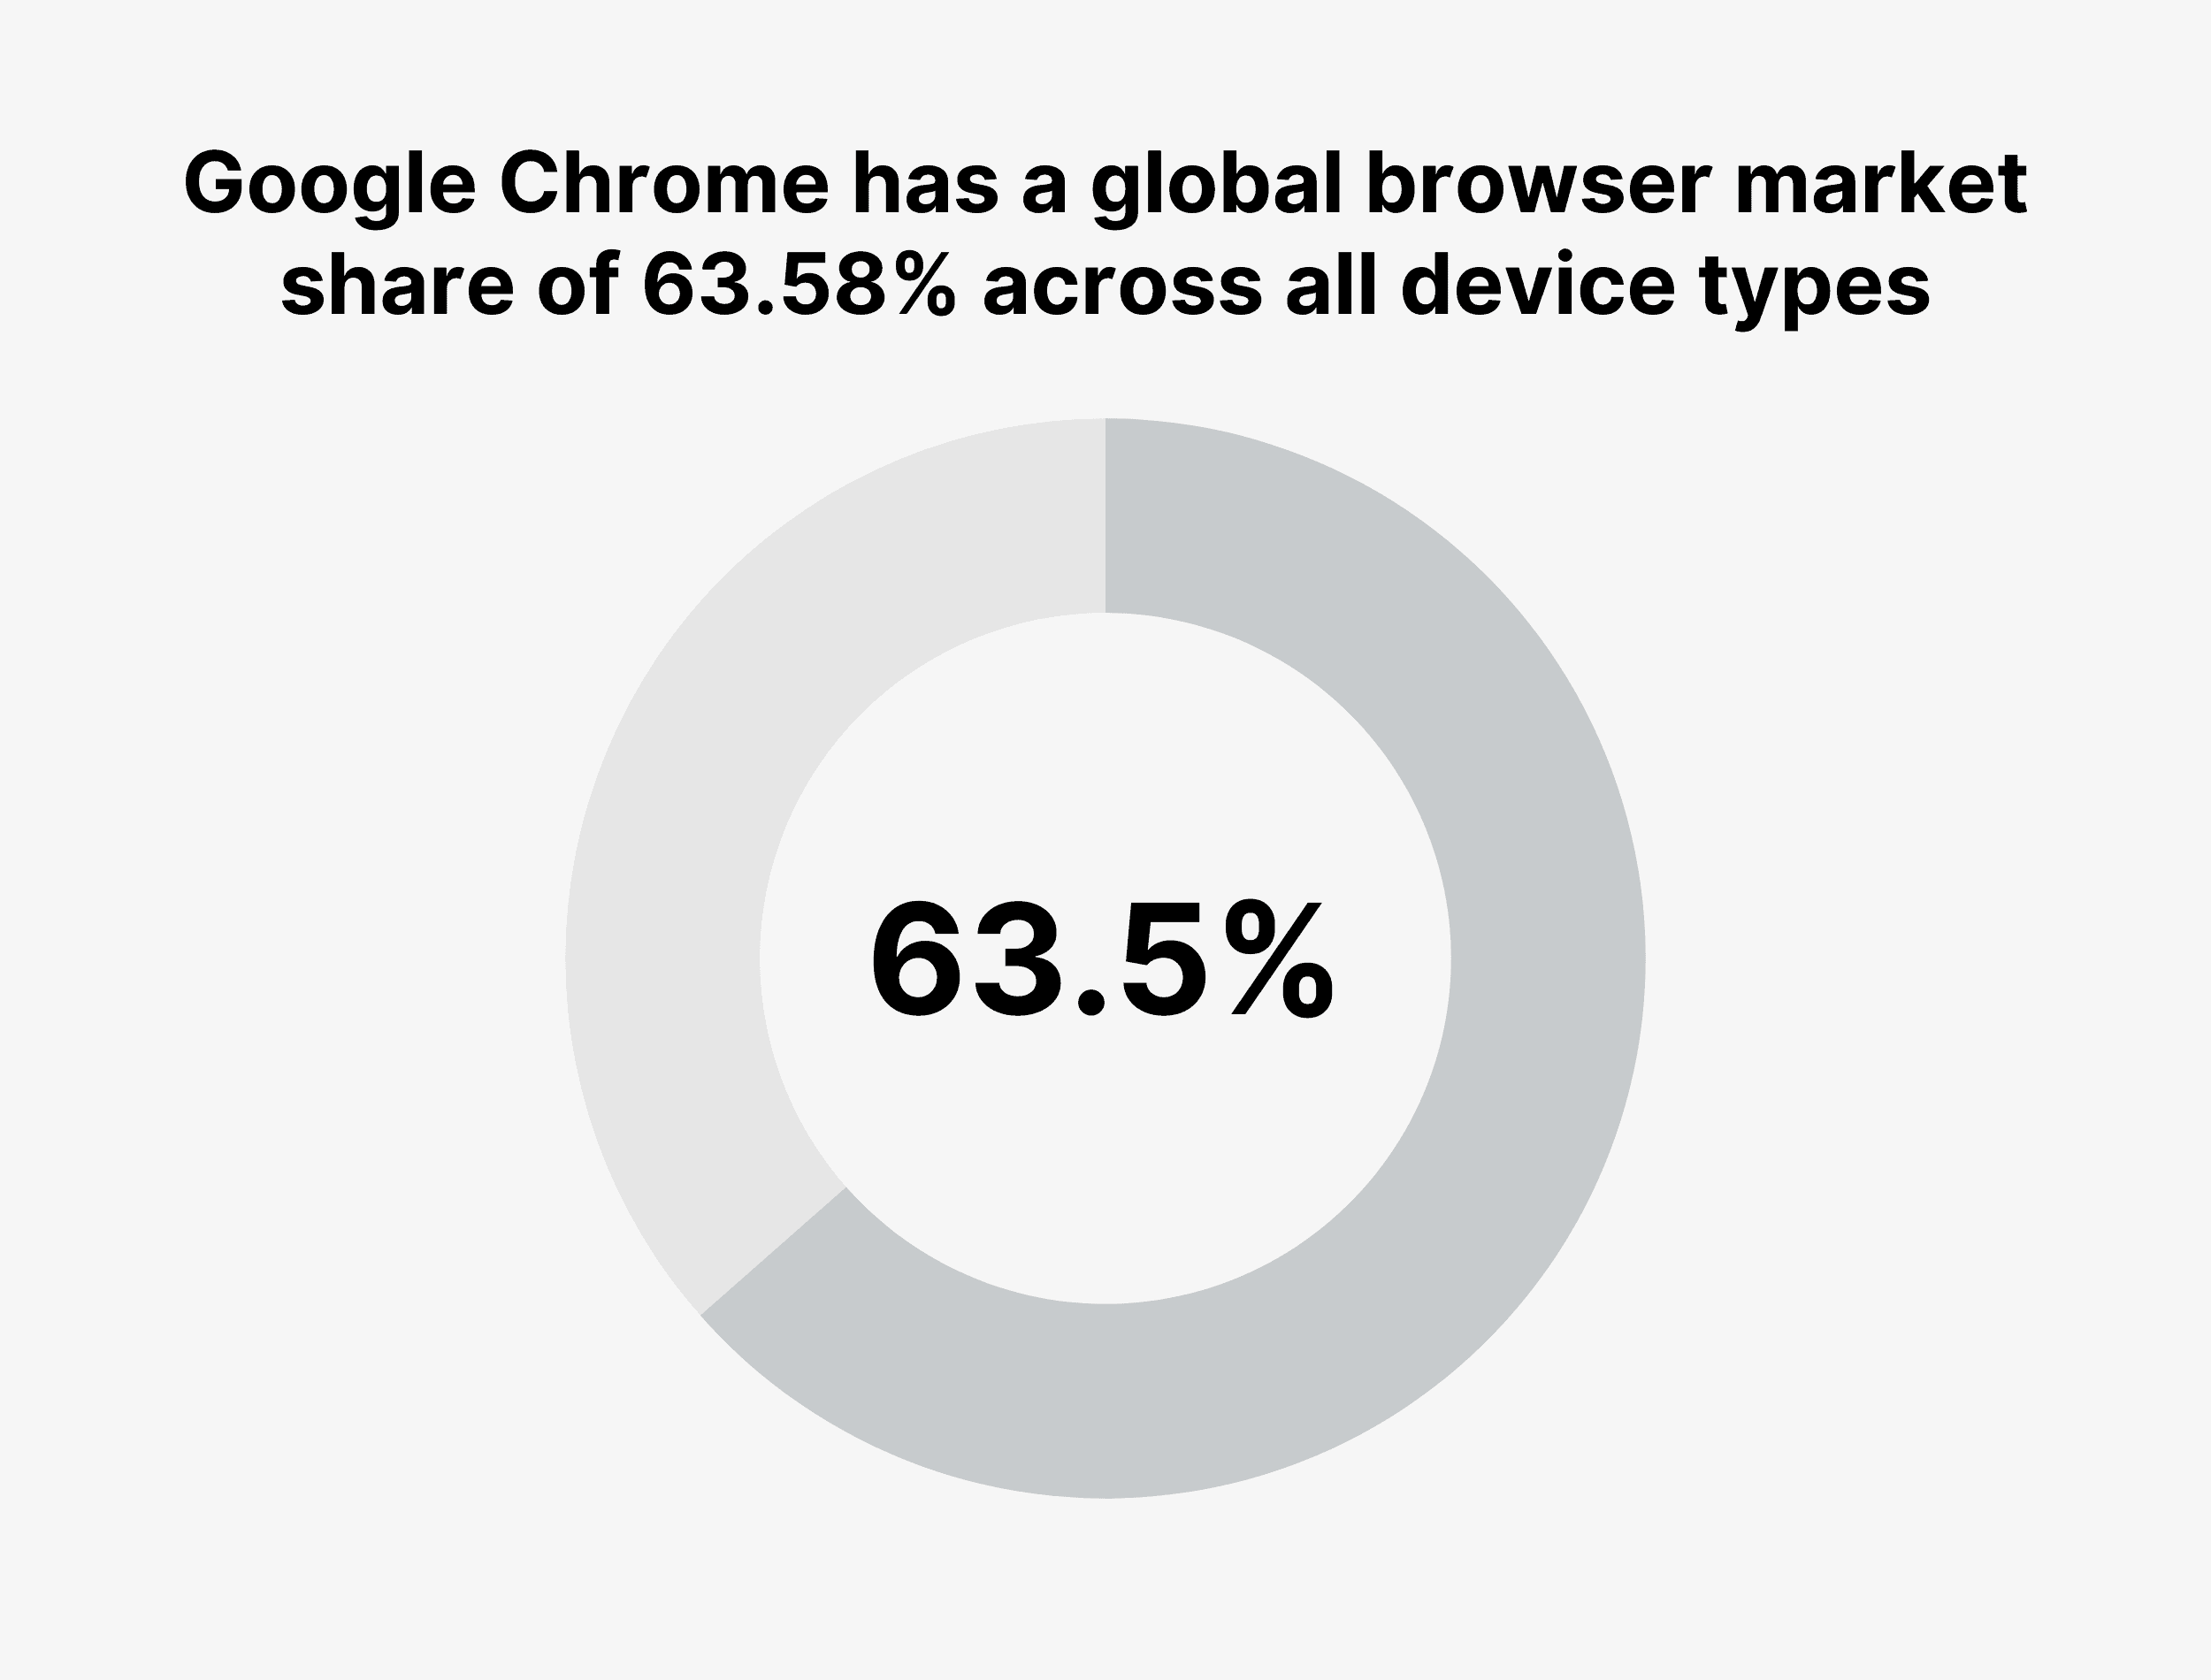 Google Chrome has a global browser market share of 63.58% across all device types